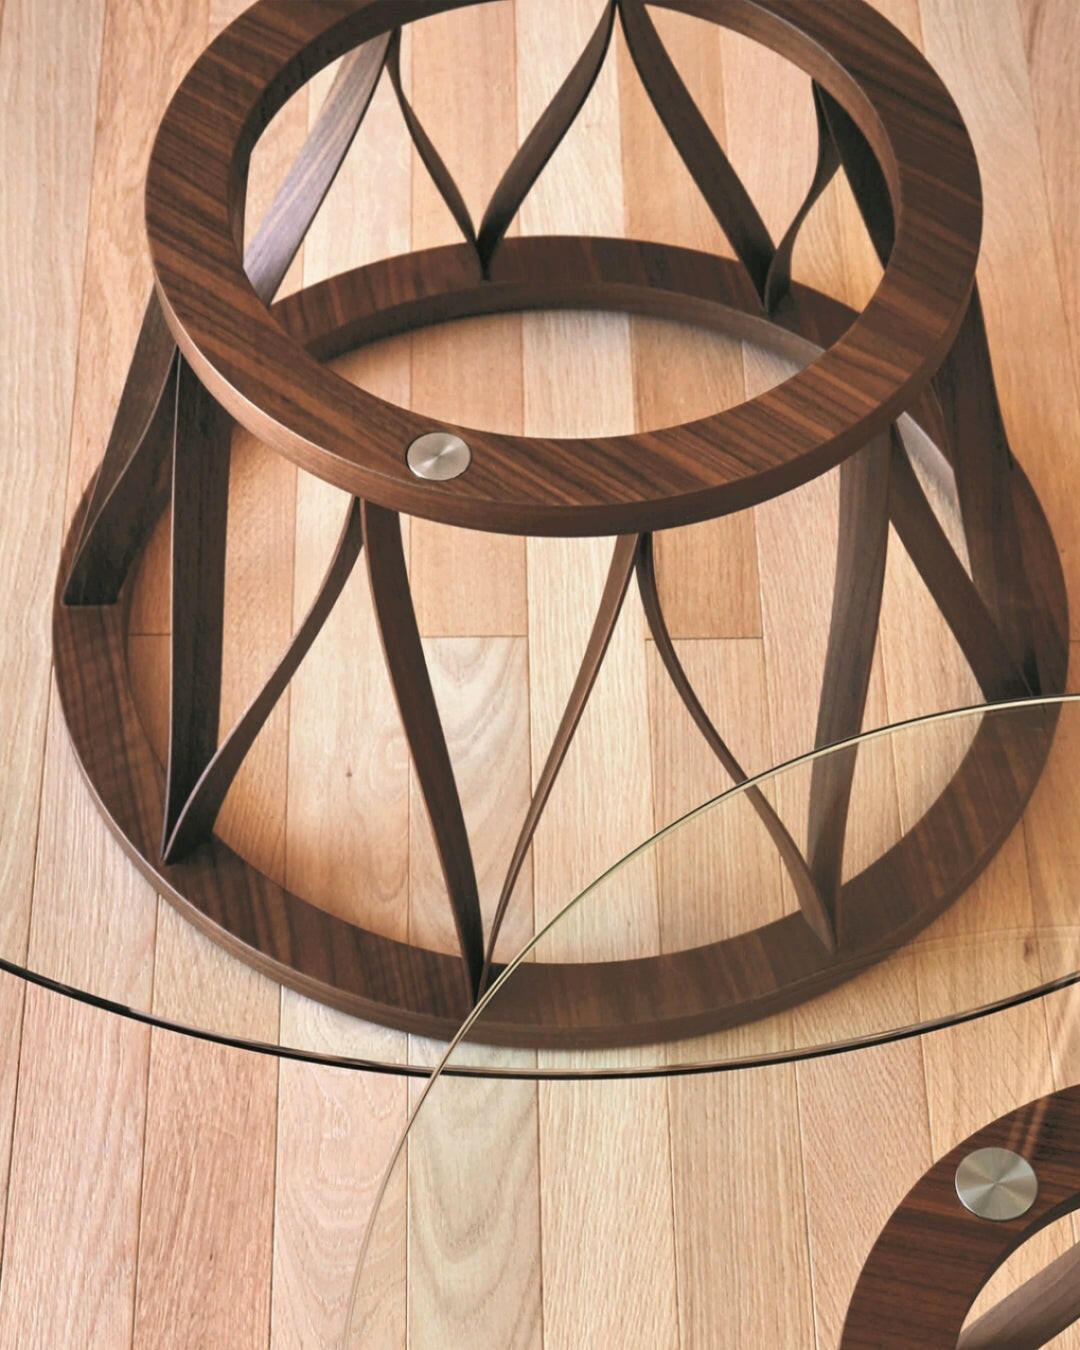 Coffee Tables | Furniture Store